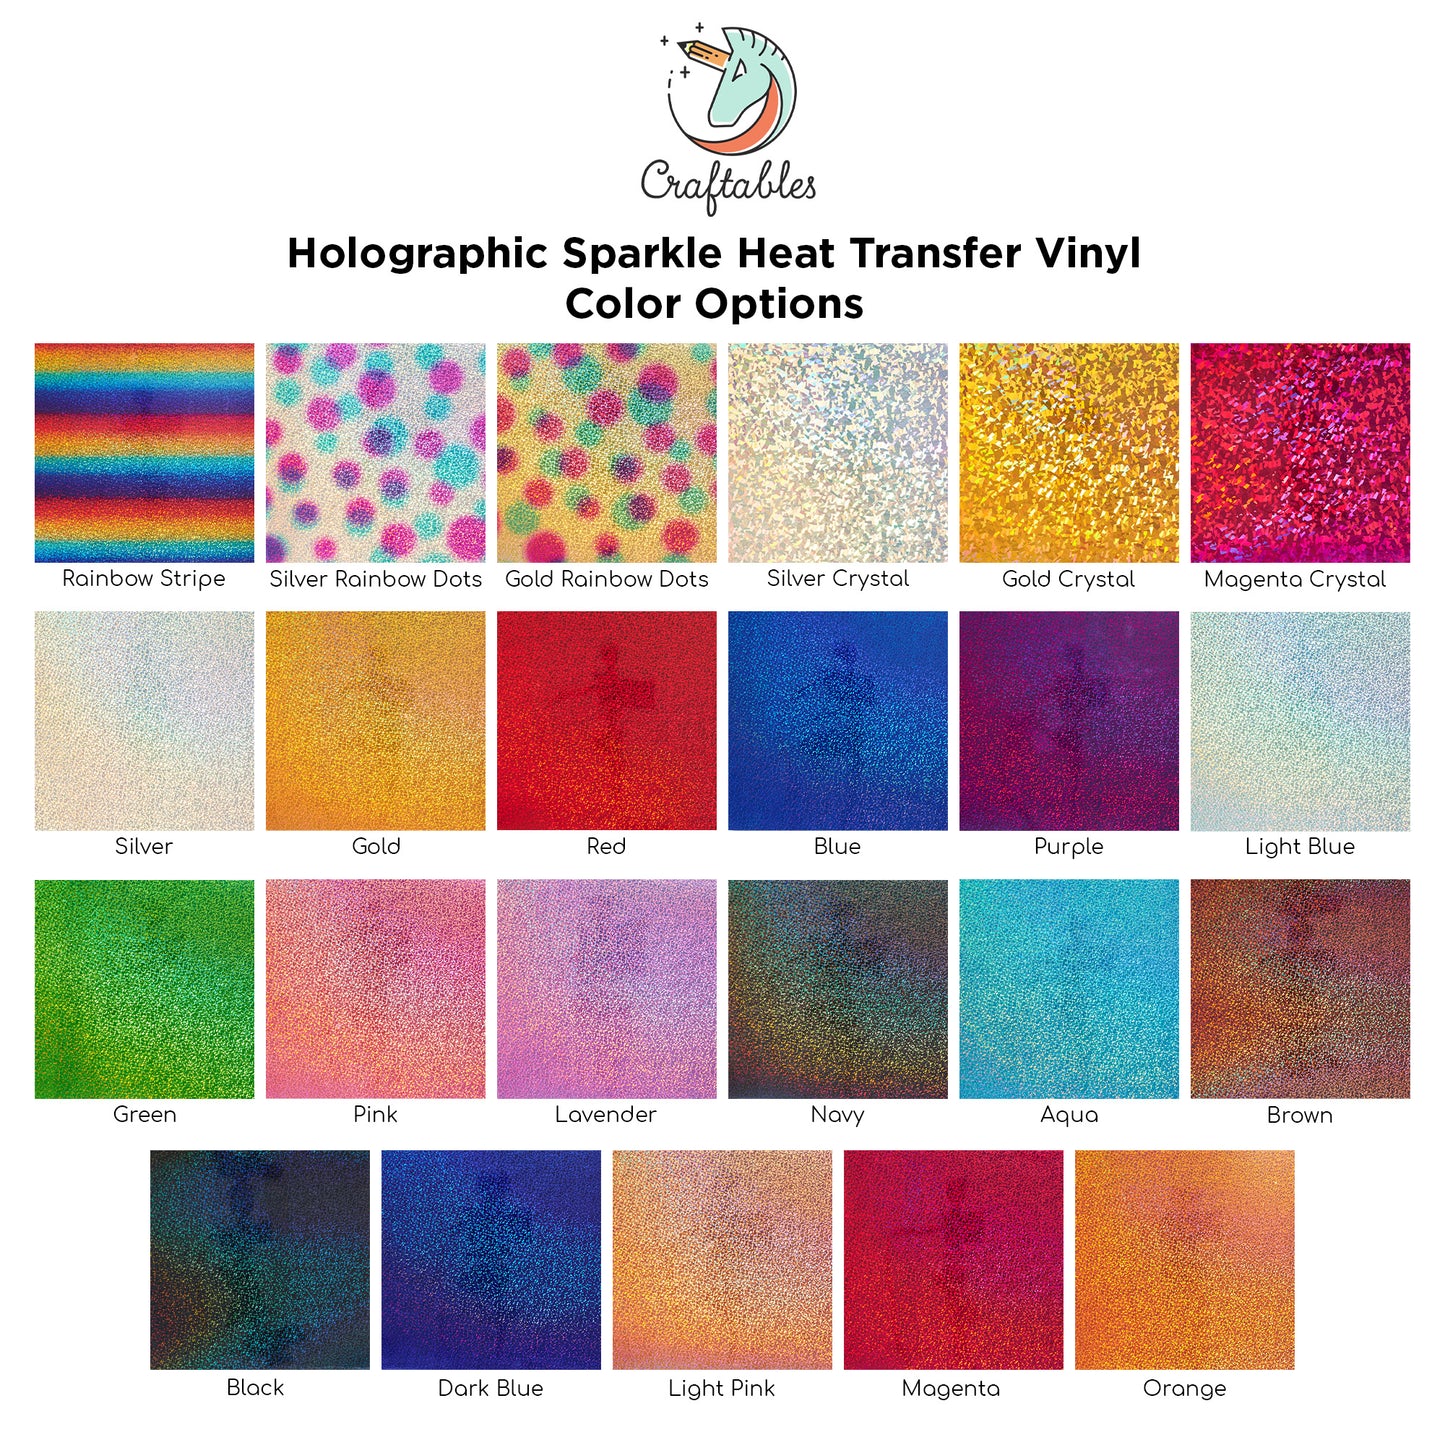 Silver Multi Holographic Sparkle Heat Transfer Vinyl Rolls By Craftables